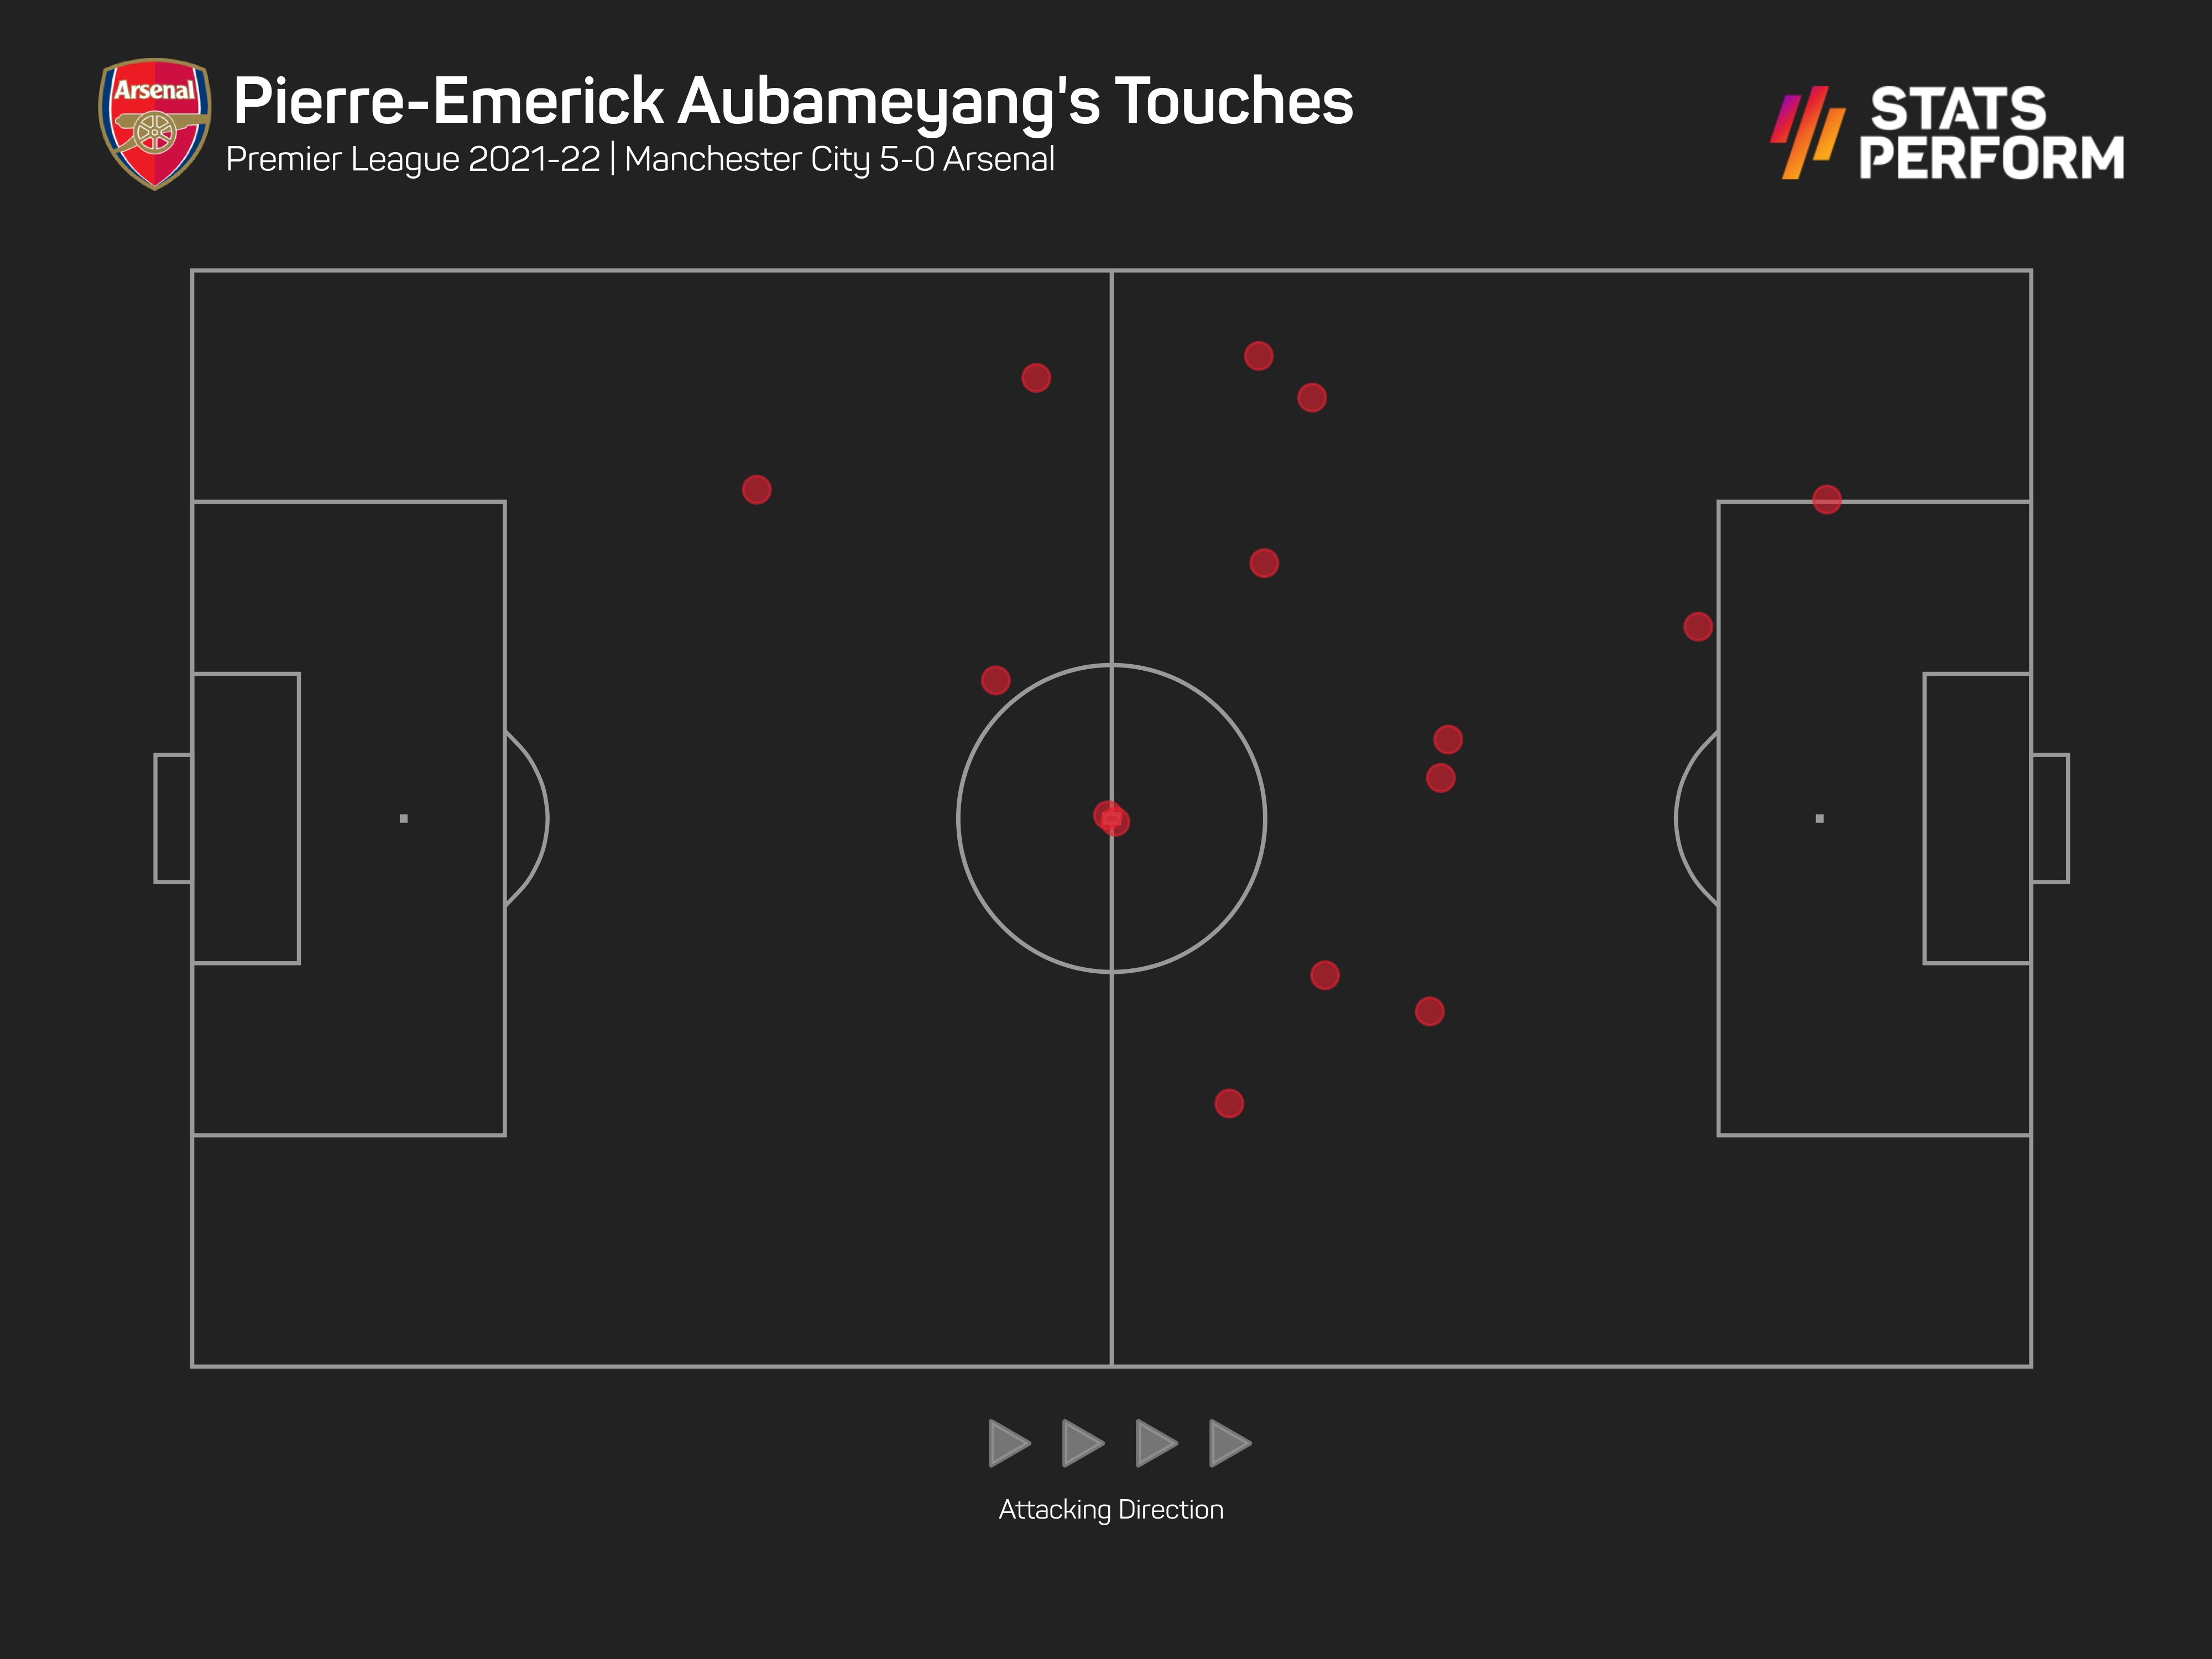 Pierre-Emerick Aubameyang had no touches in the box against City